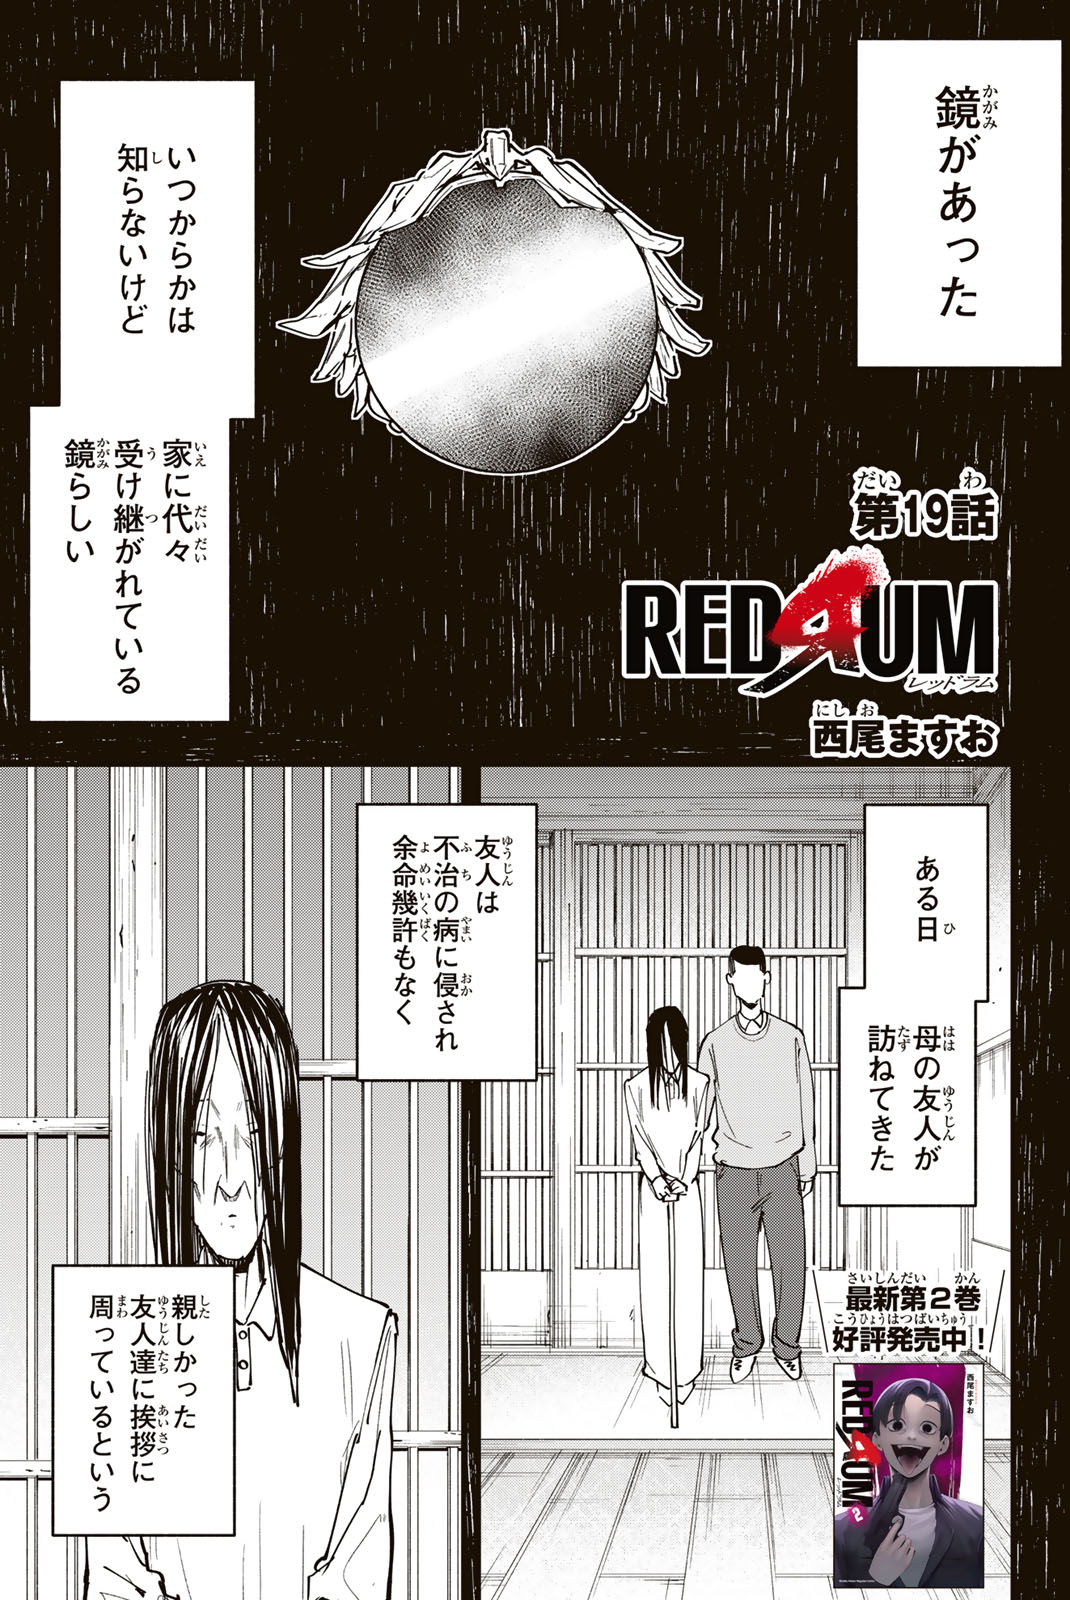 REDRUM 第19話 - Page 1